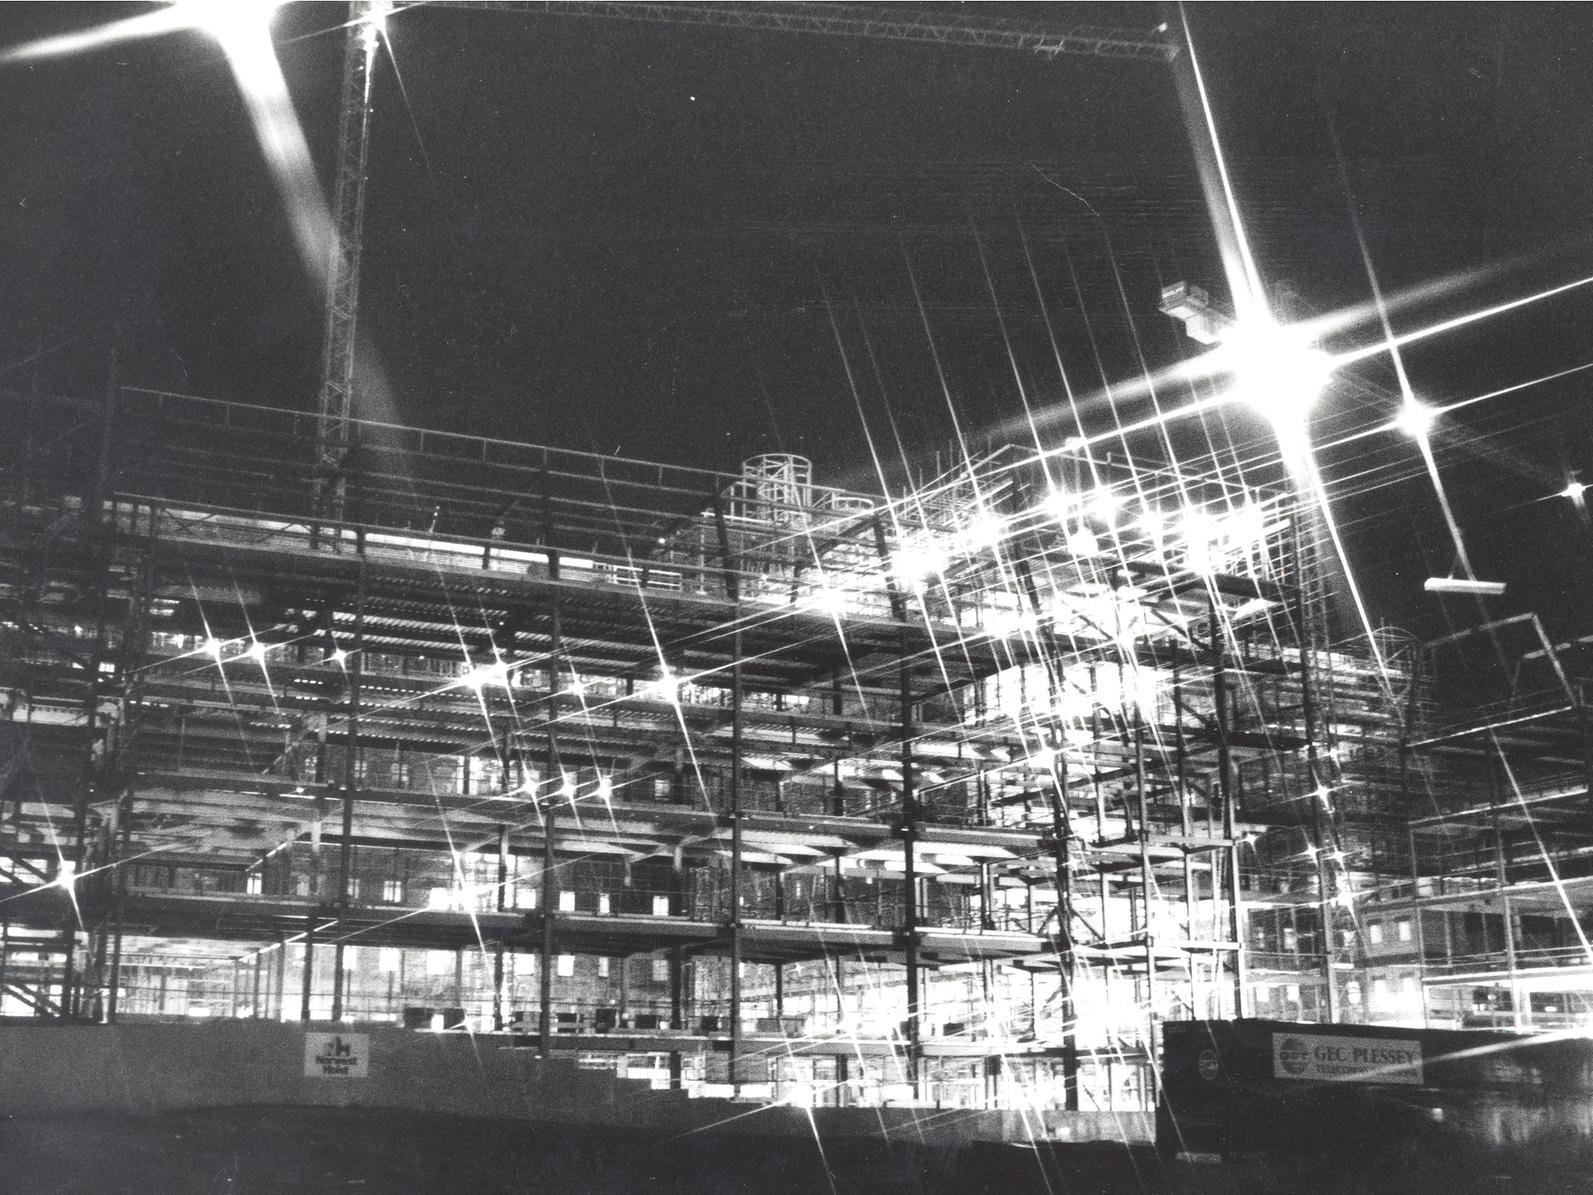 A special camera lens adds a sparkle to this night time view of Quarry House when under construction in November 1991.